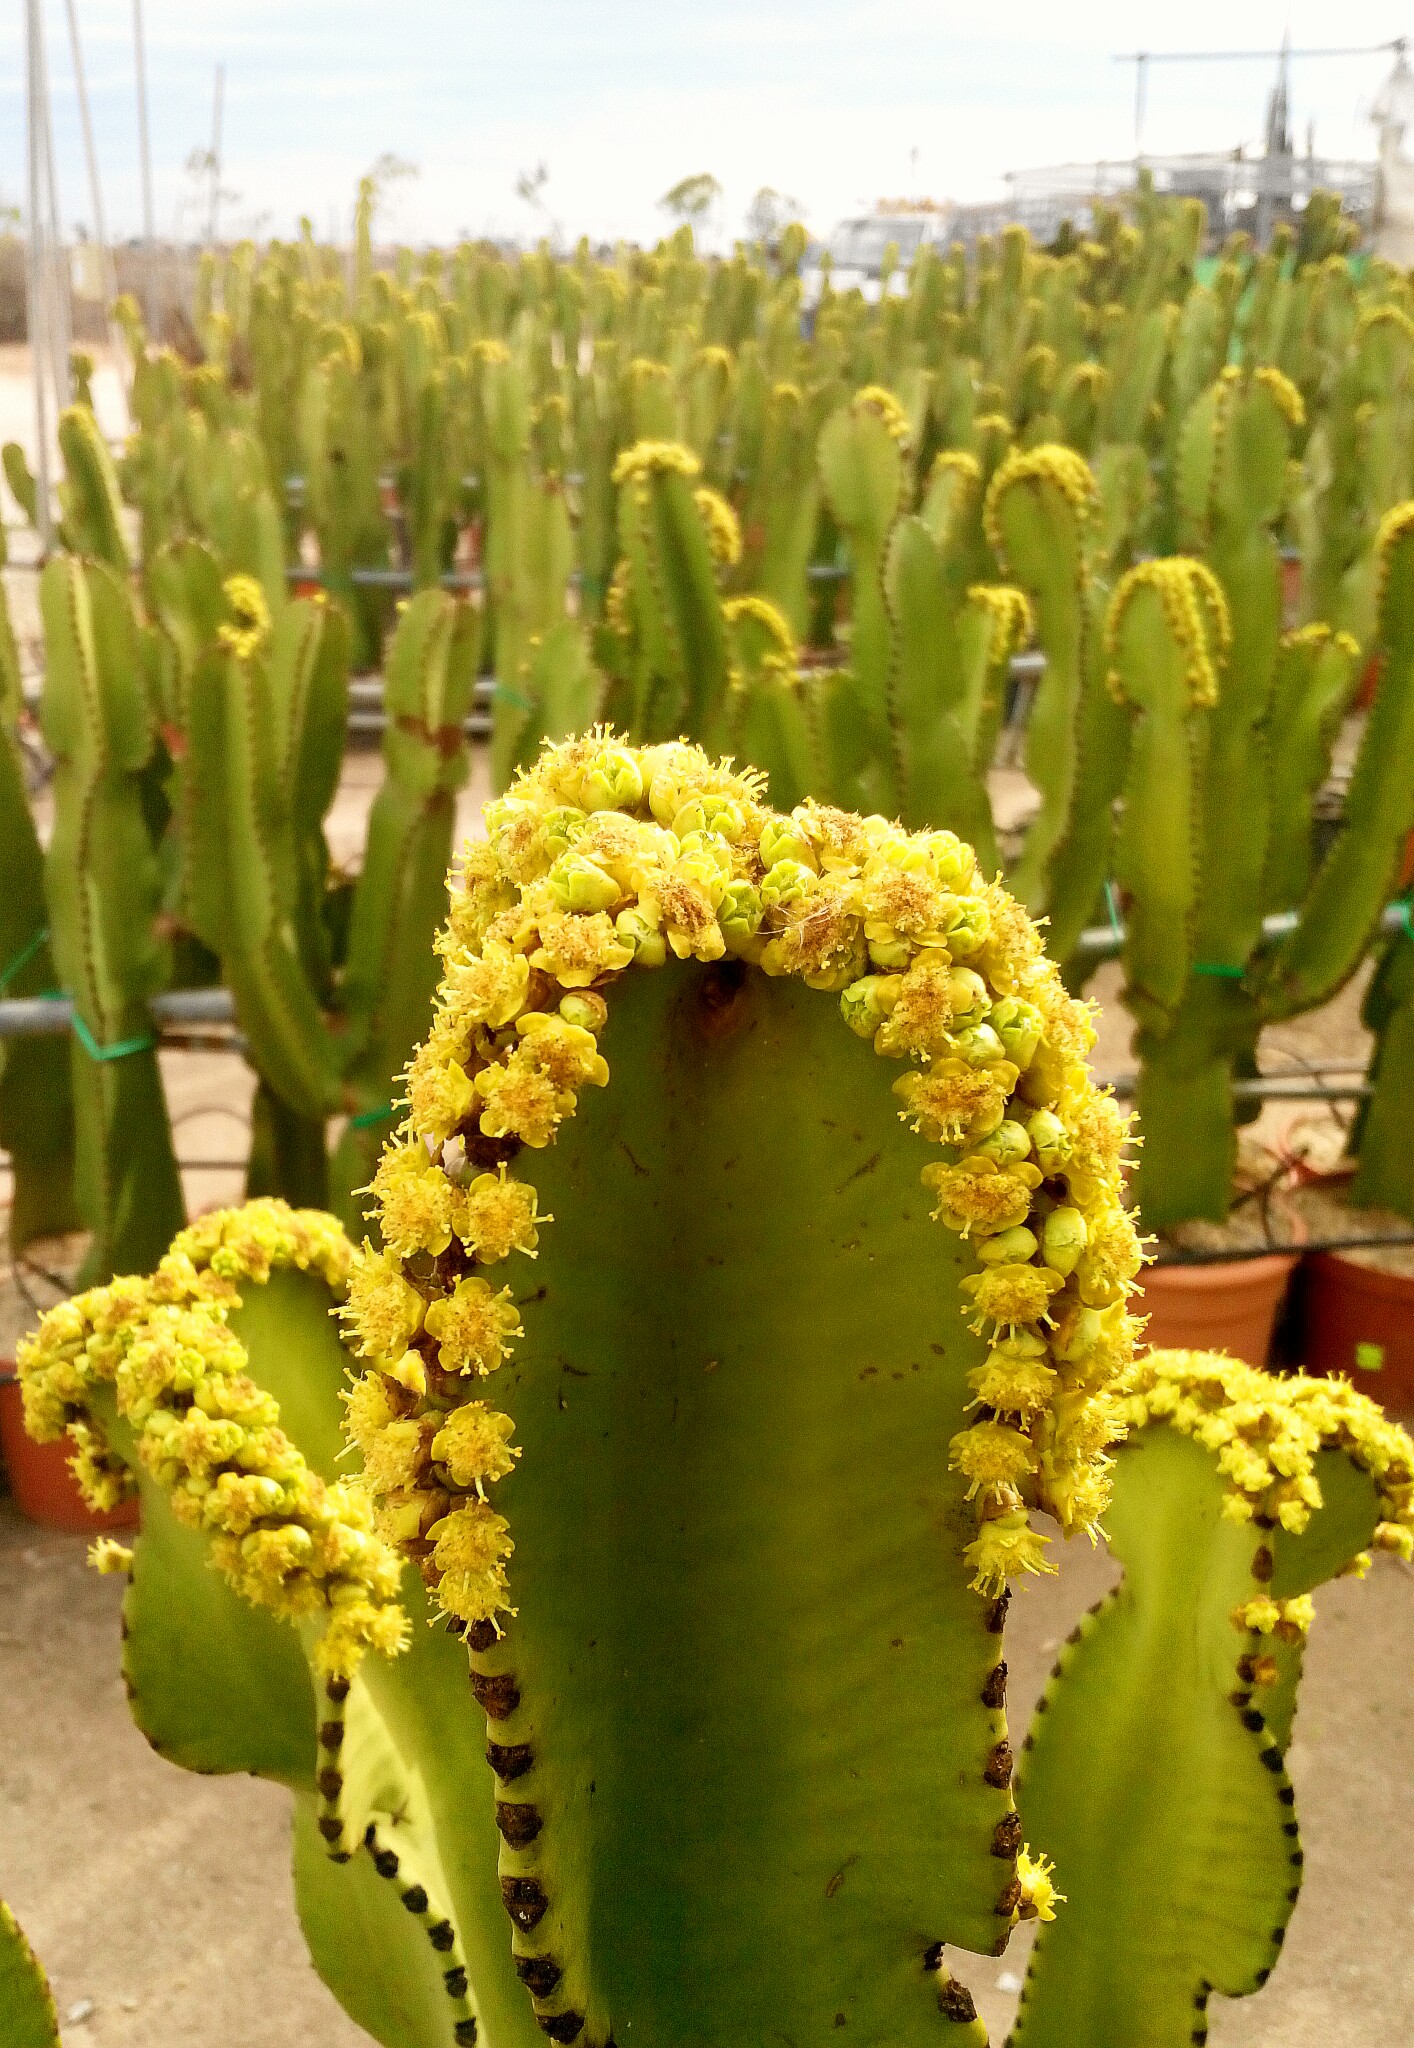 A pretty blooming cactus. Spring is just around the corner :) February, 18, 2016